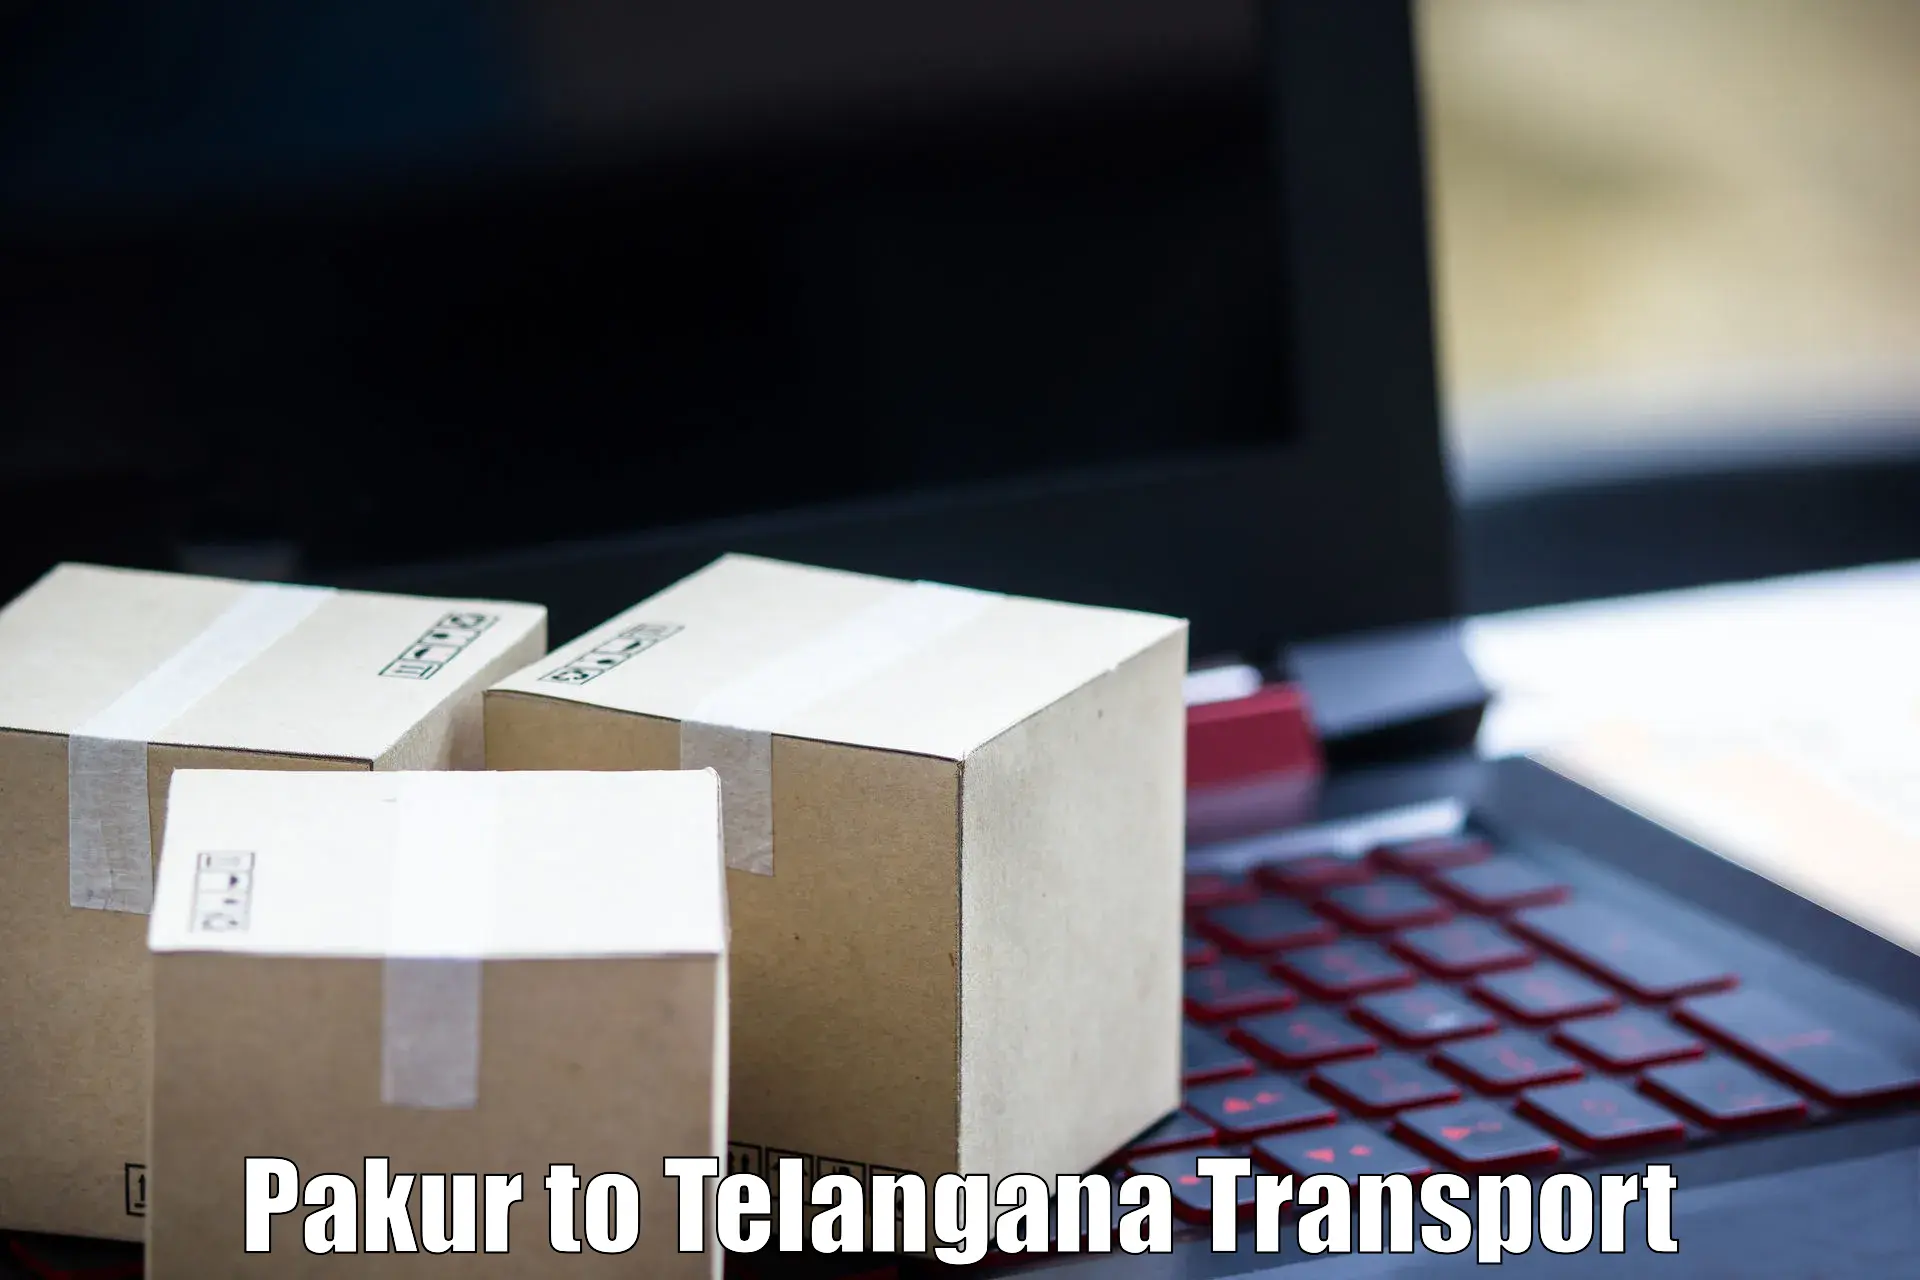 Vehicle transport services in Pakur to Narayanpet